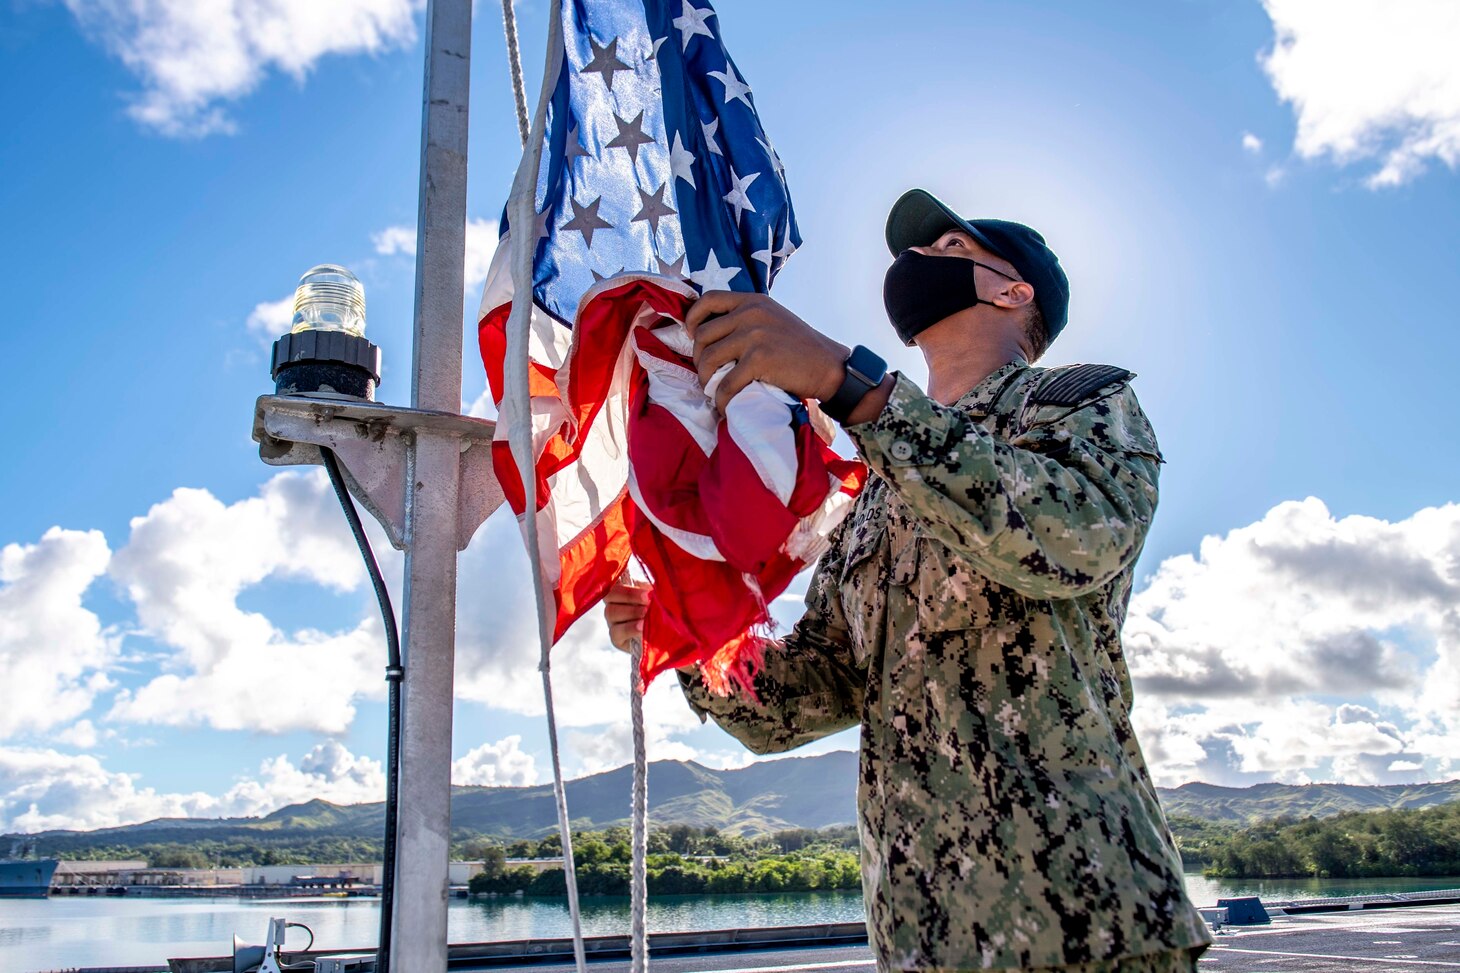 Culinary Specialist Seaman Apprentice Jeremy Reynolds, from Atlanta, hoists the ensign during morning colors aboard the Independence-variant littoral combat ship USS Charleston (LCS 18).